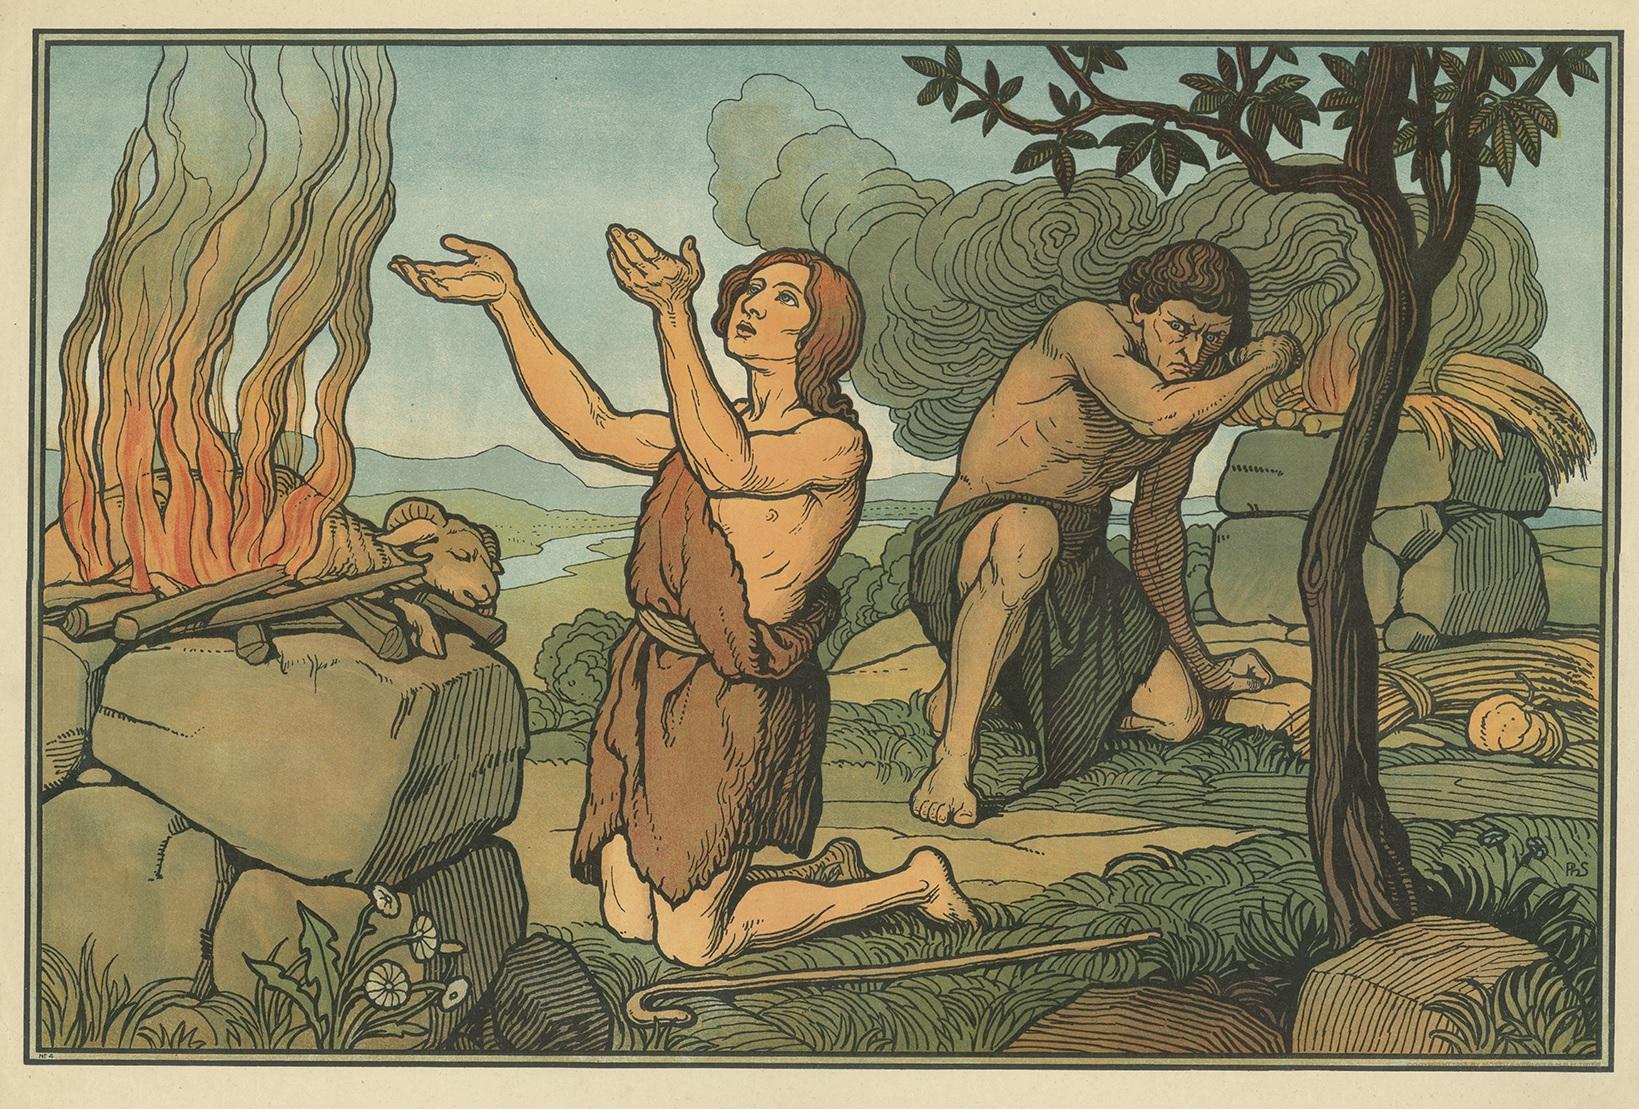 Large antique print of Cain and Abel. Published by Mosella-Verlag, 1913. This print originates from a series titled 'Kathol. Schulbibelwerk von Dr. Ecker'.